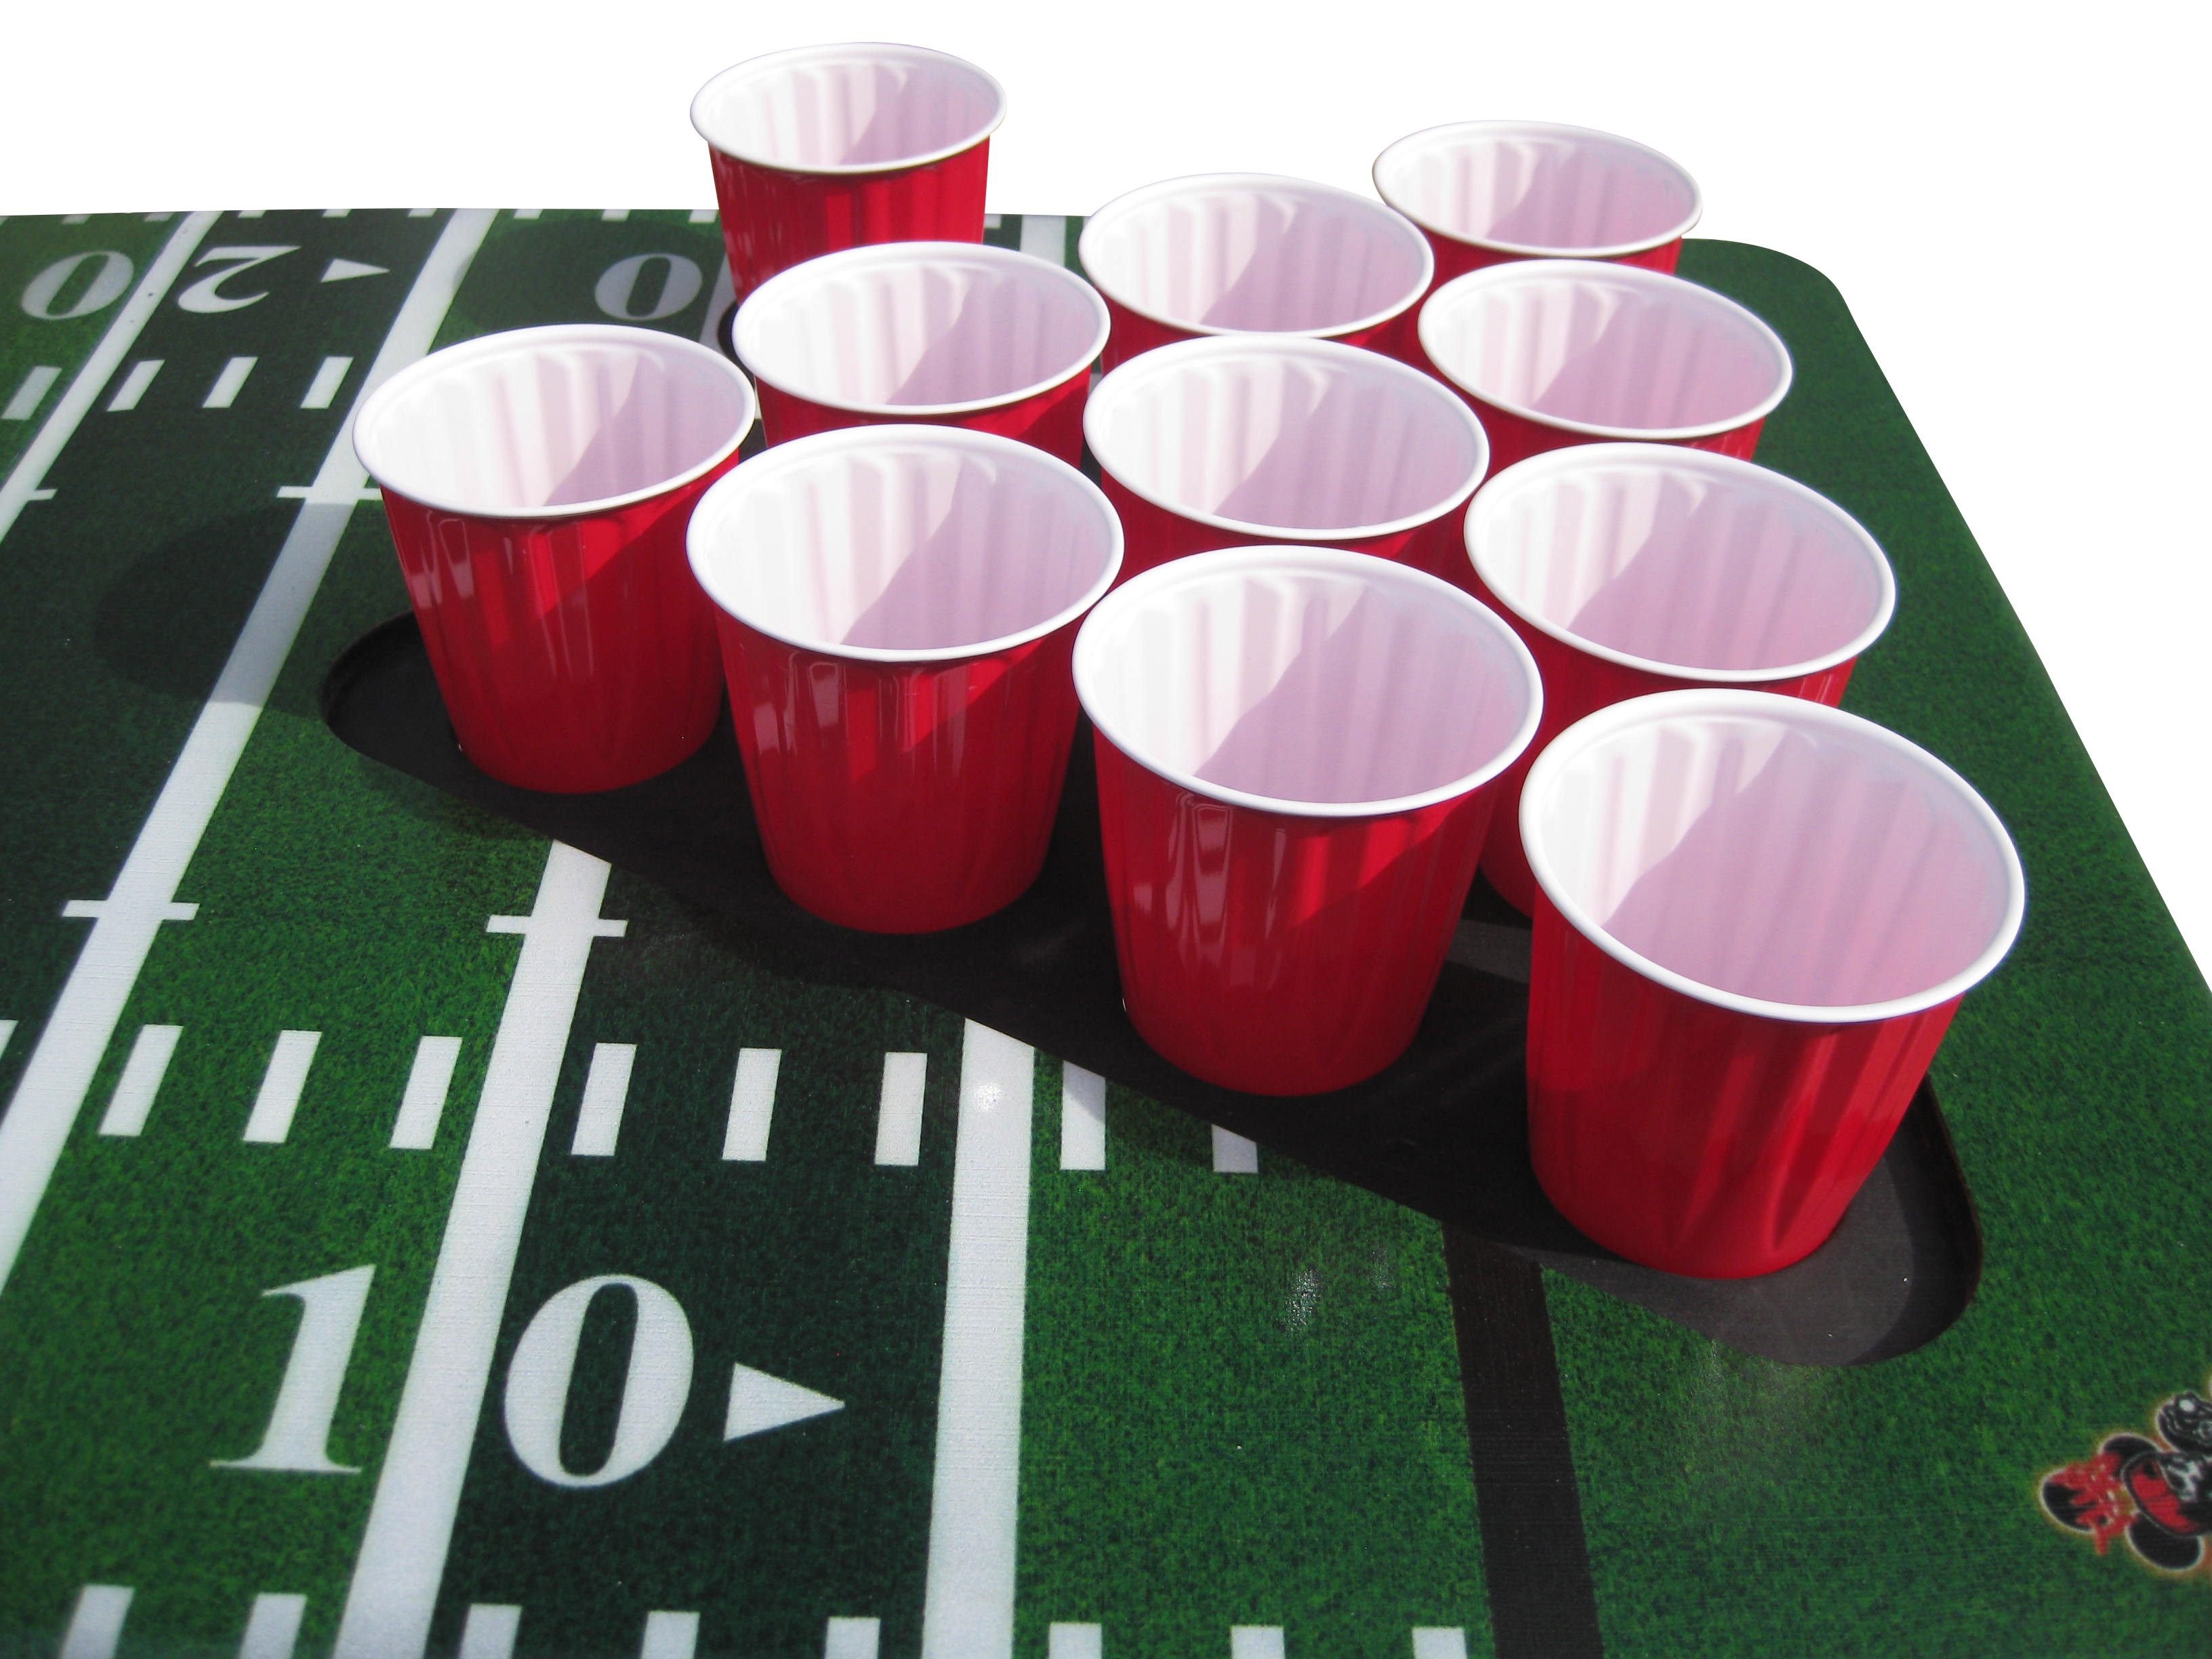 Football table with cups installed